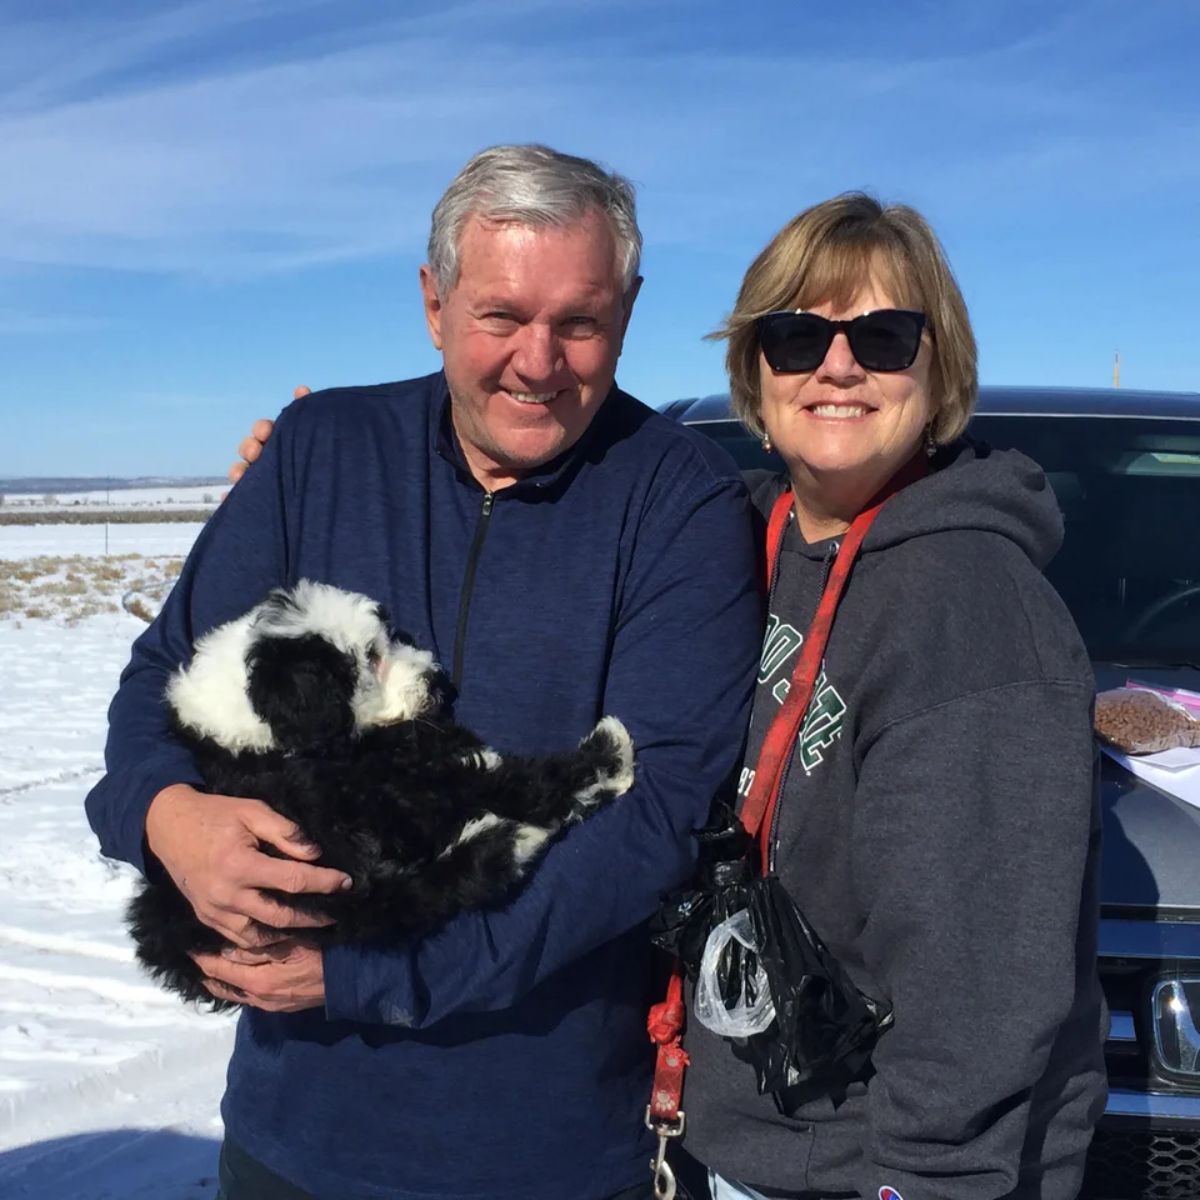 small fluffy black and white puppy being cuddled by an old man who is posing with an old woman in front of a vehicle in a snowy landscape